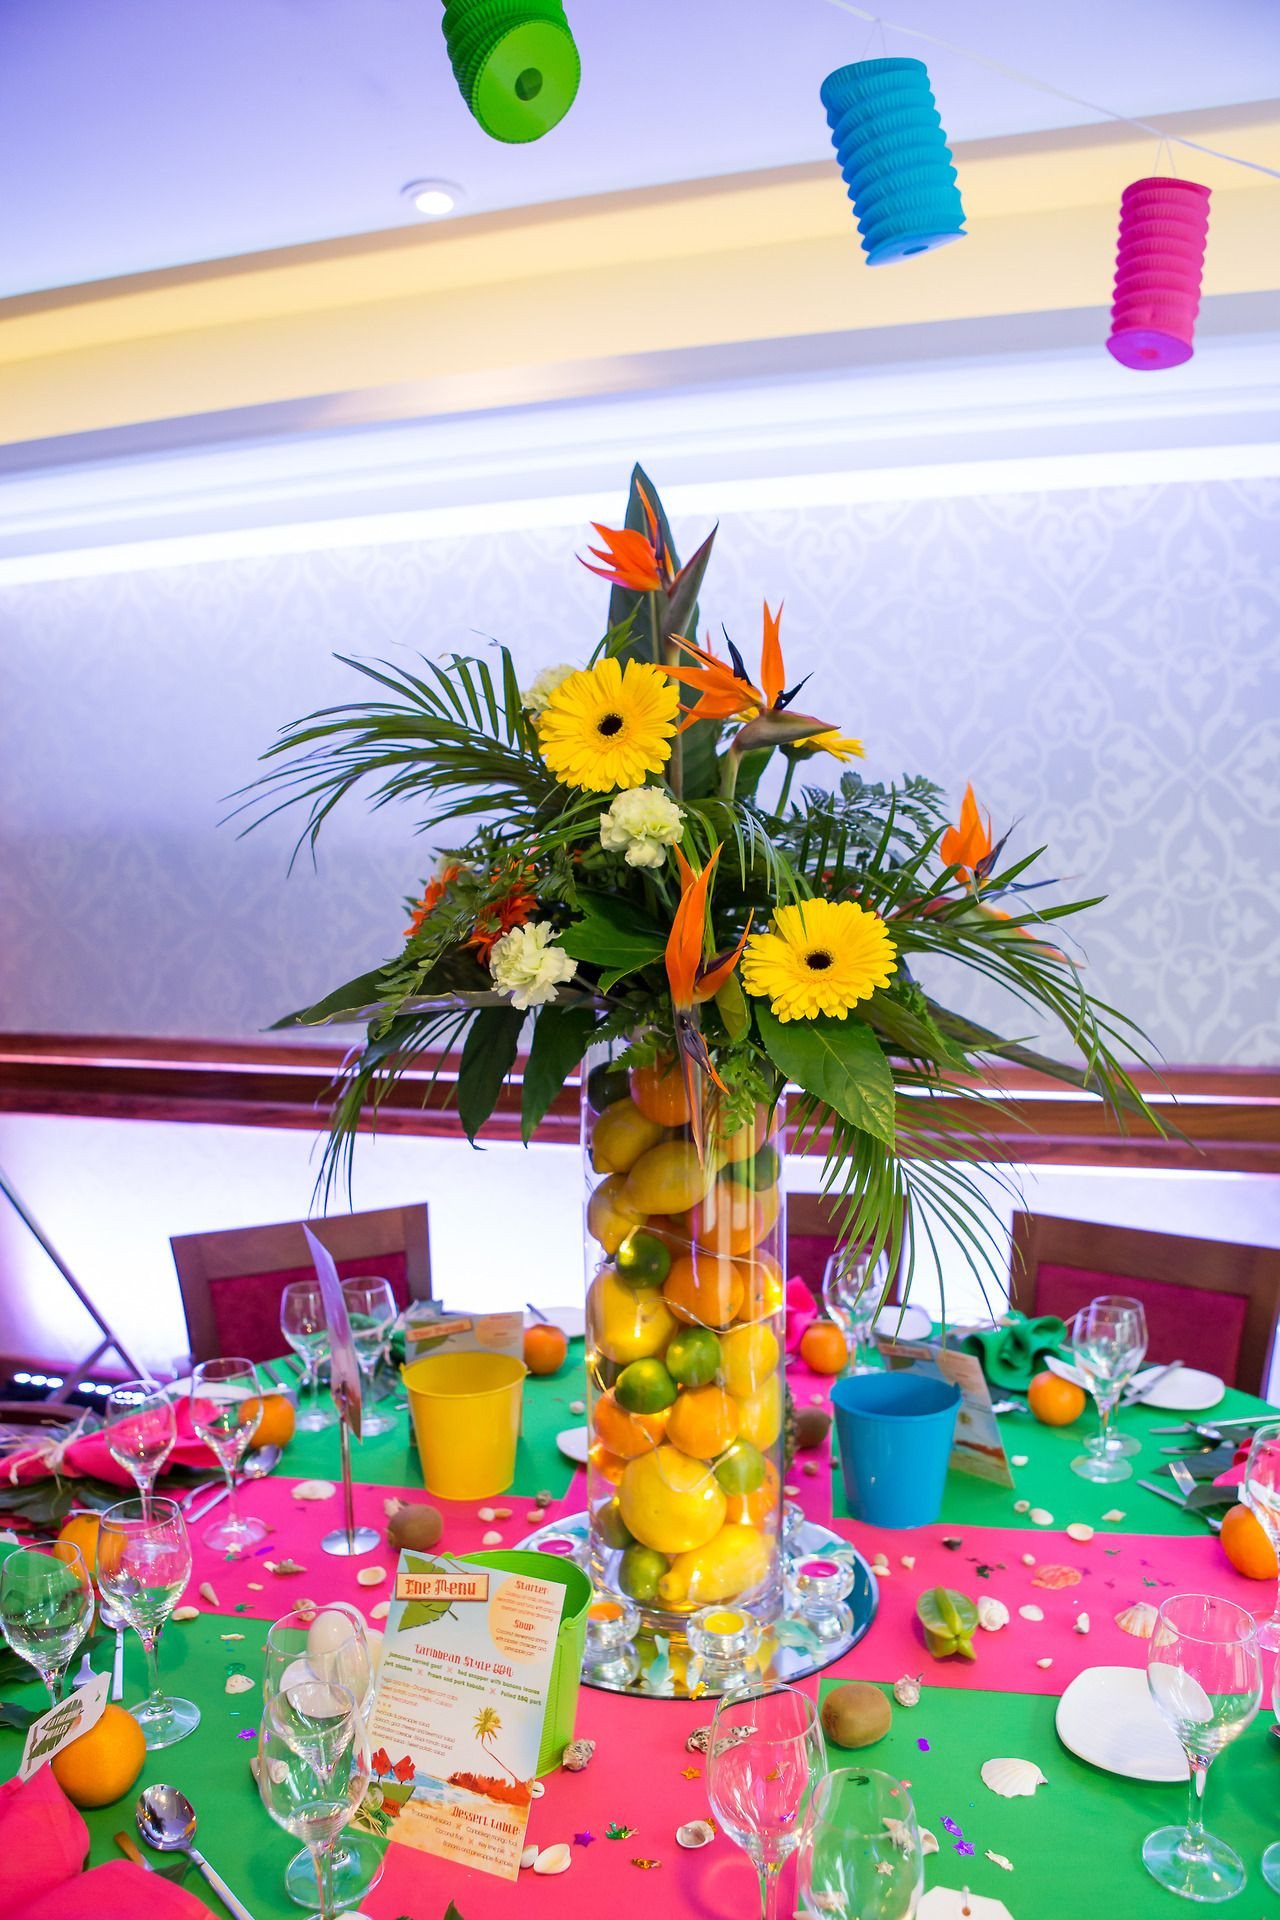 Beach Party Table Decoration Ideas
 Caribbean Tropical Beach Party table displays in 2019